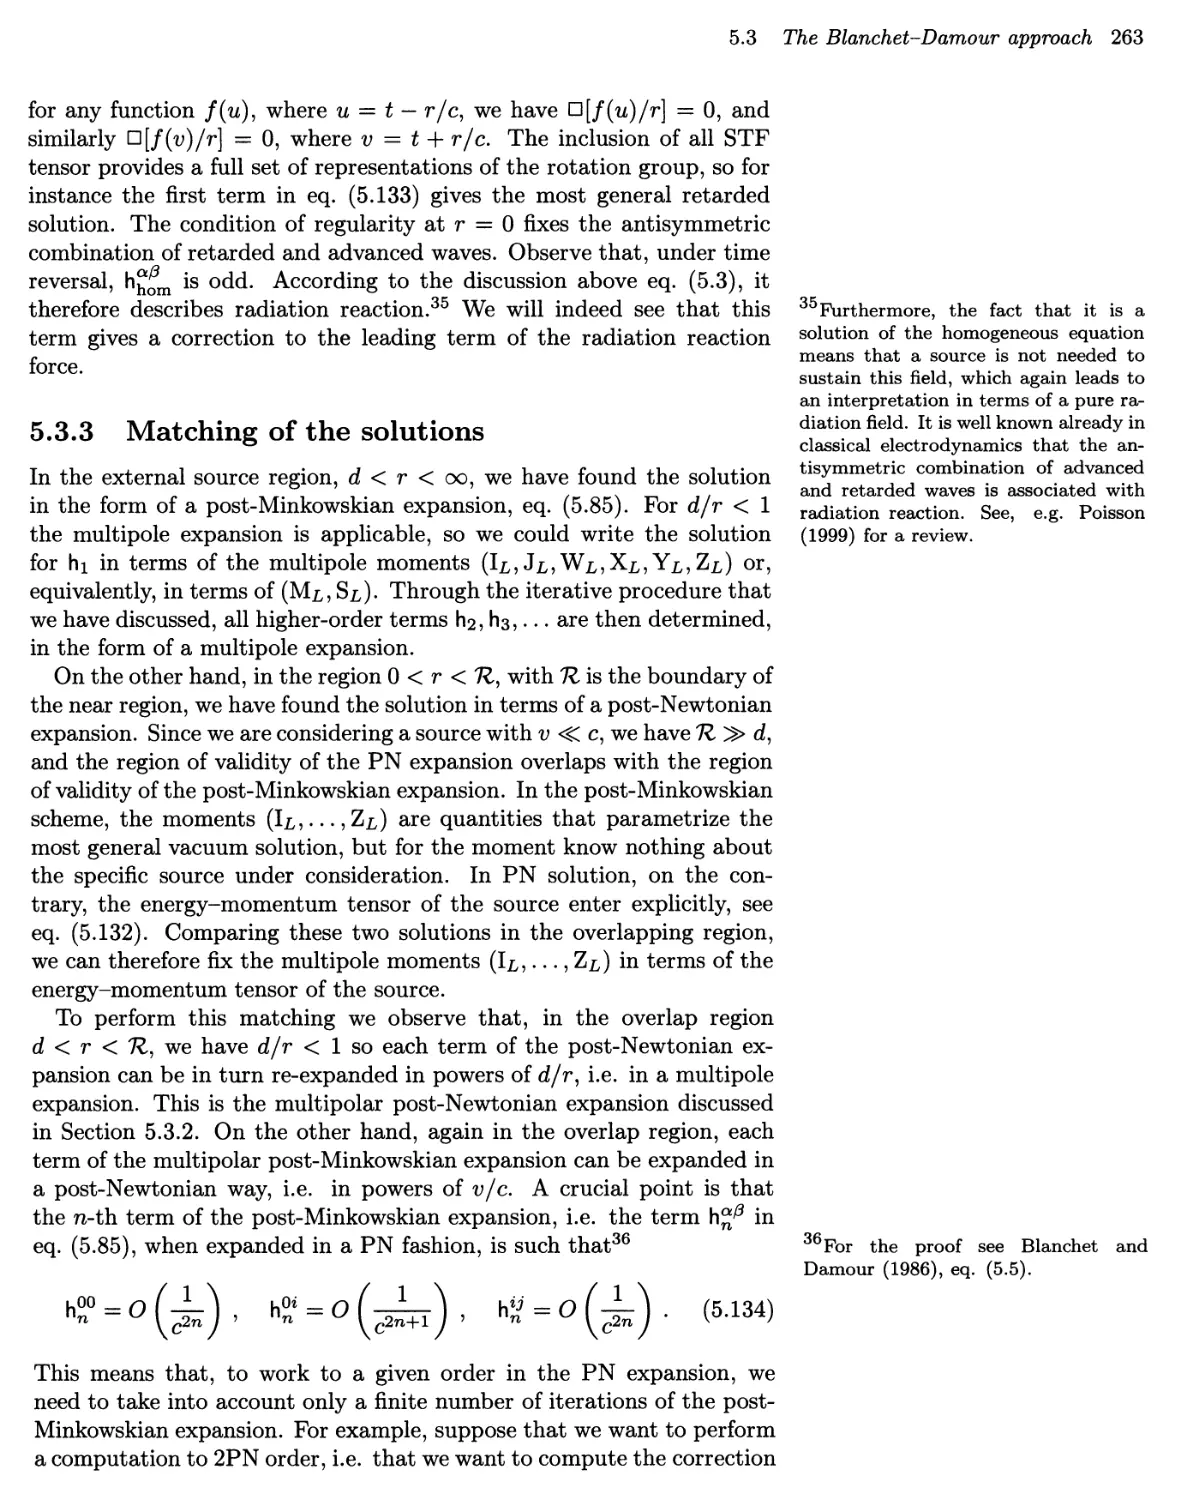 5.3.3 Matching of the solutions 263